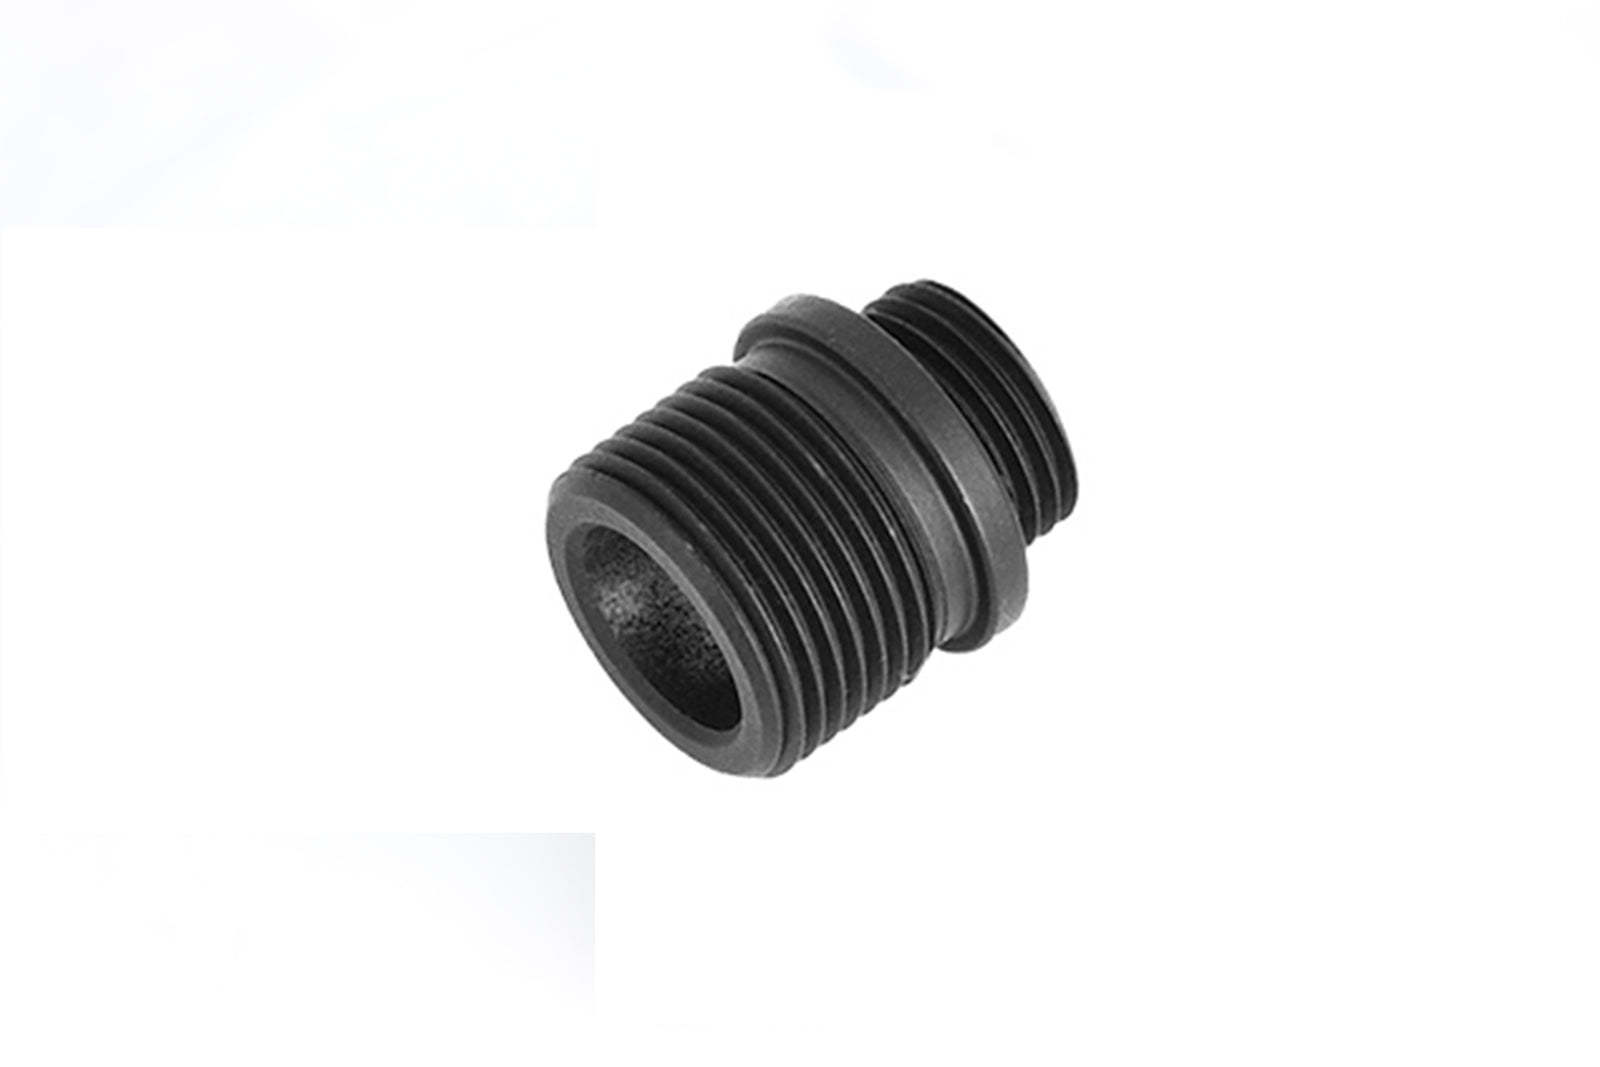 11mm to 14mm CCW Threaded Adapter for GBB Pistols